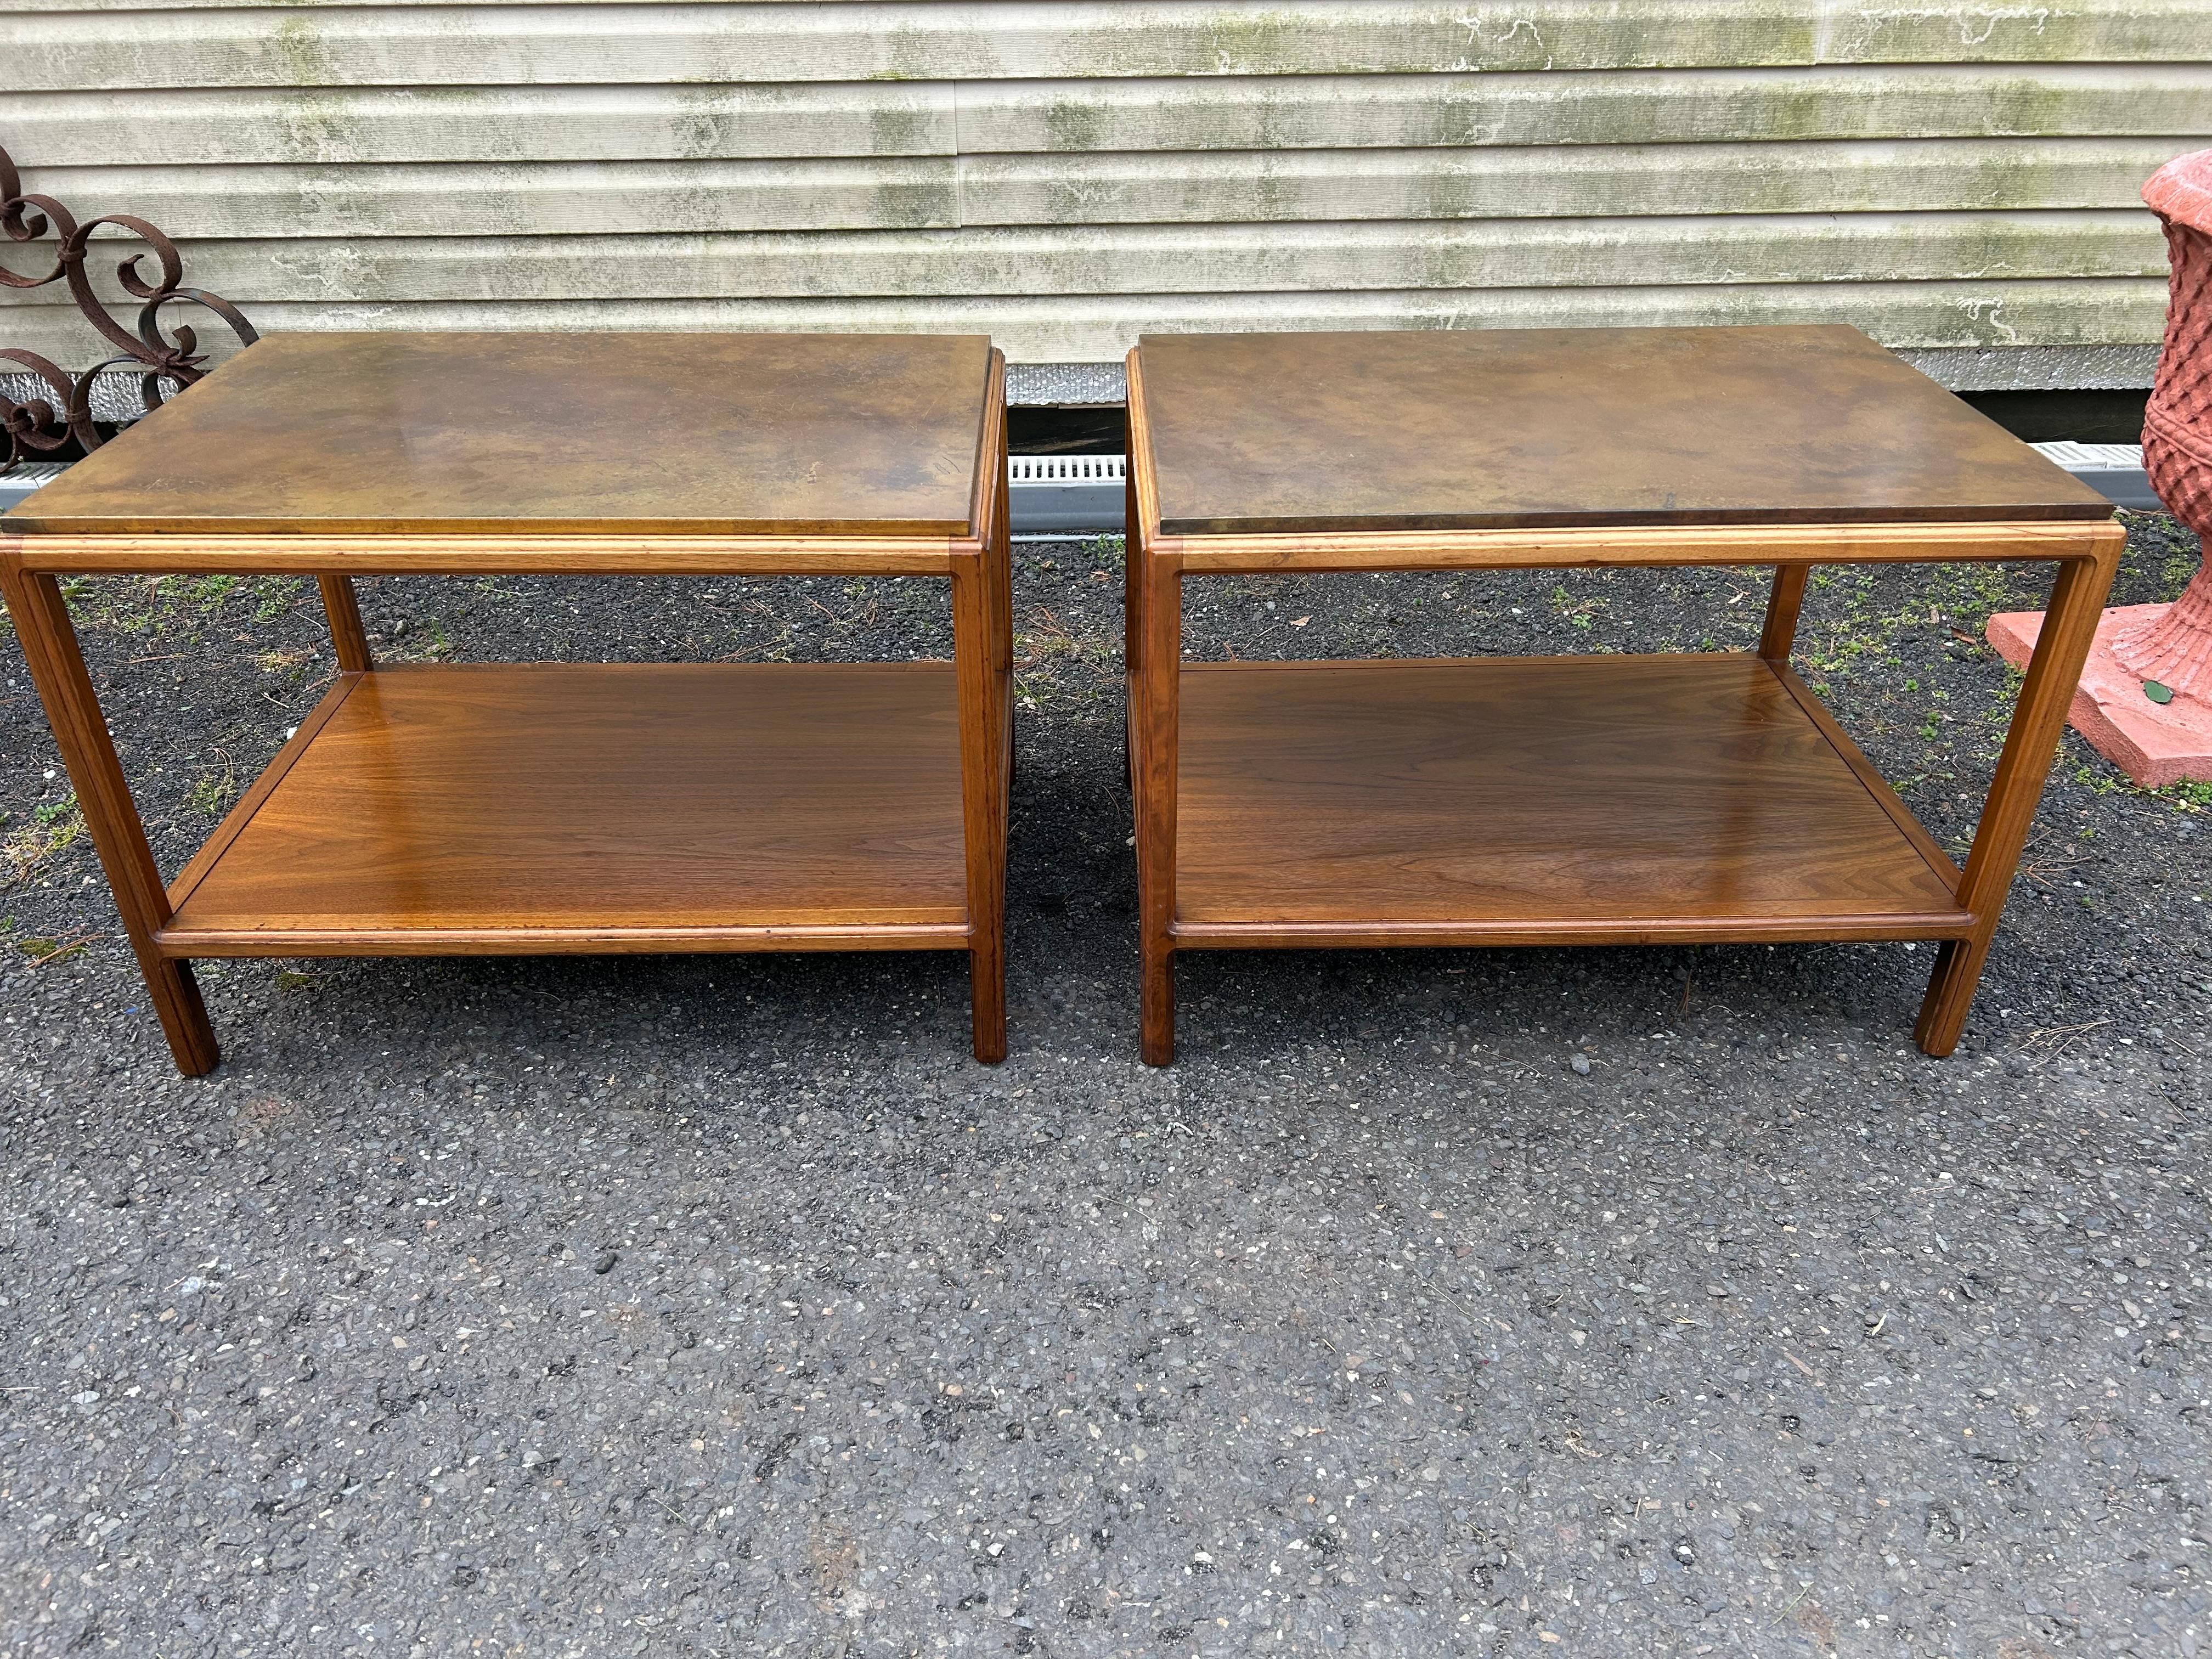 Sensational pair of John Stuart copper top 2 tiered end tables.  We love the patinated copper tops with the well crafted frames and 2nd level-very stylish.  These measure 21